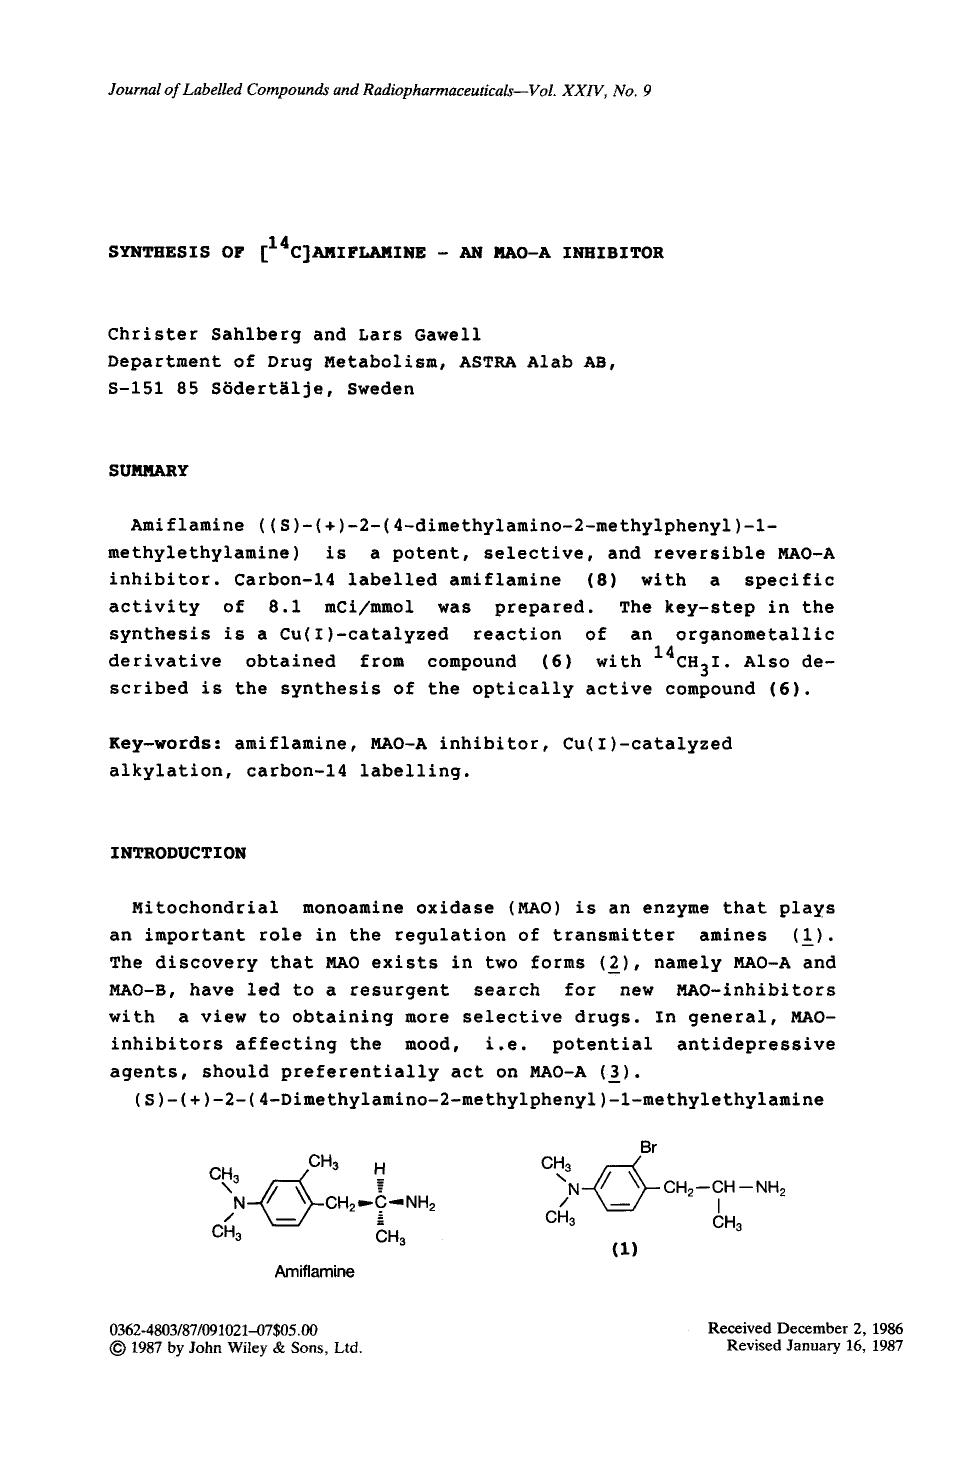 Synthesis of [14C]amiflamine - an MAO-A inhibitor by Unknown